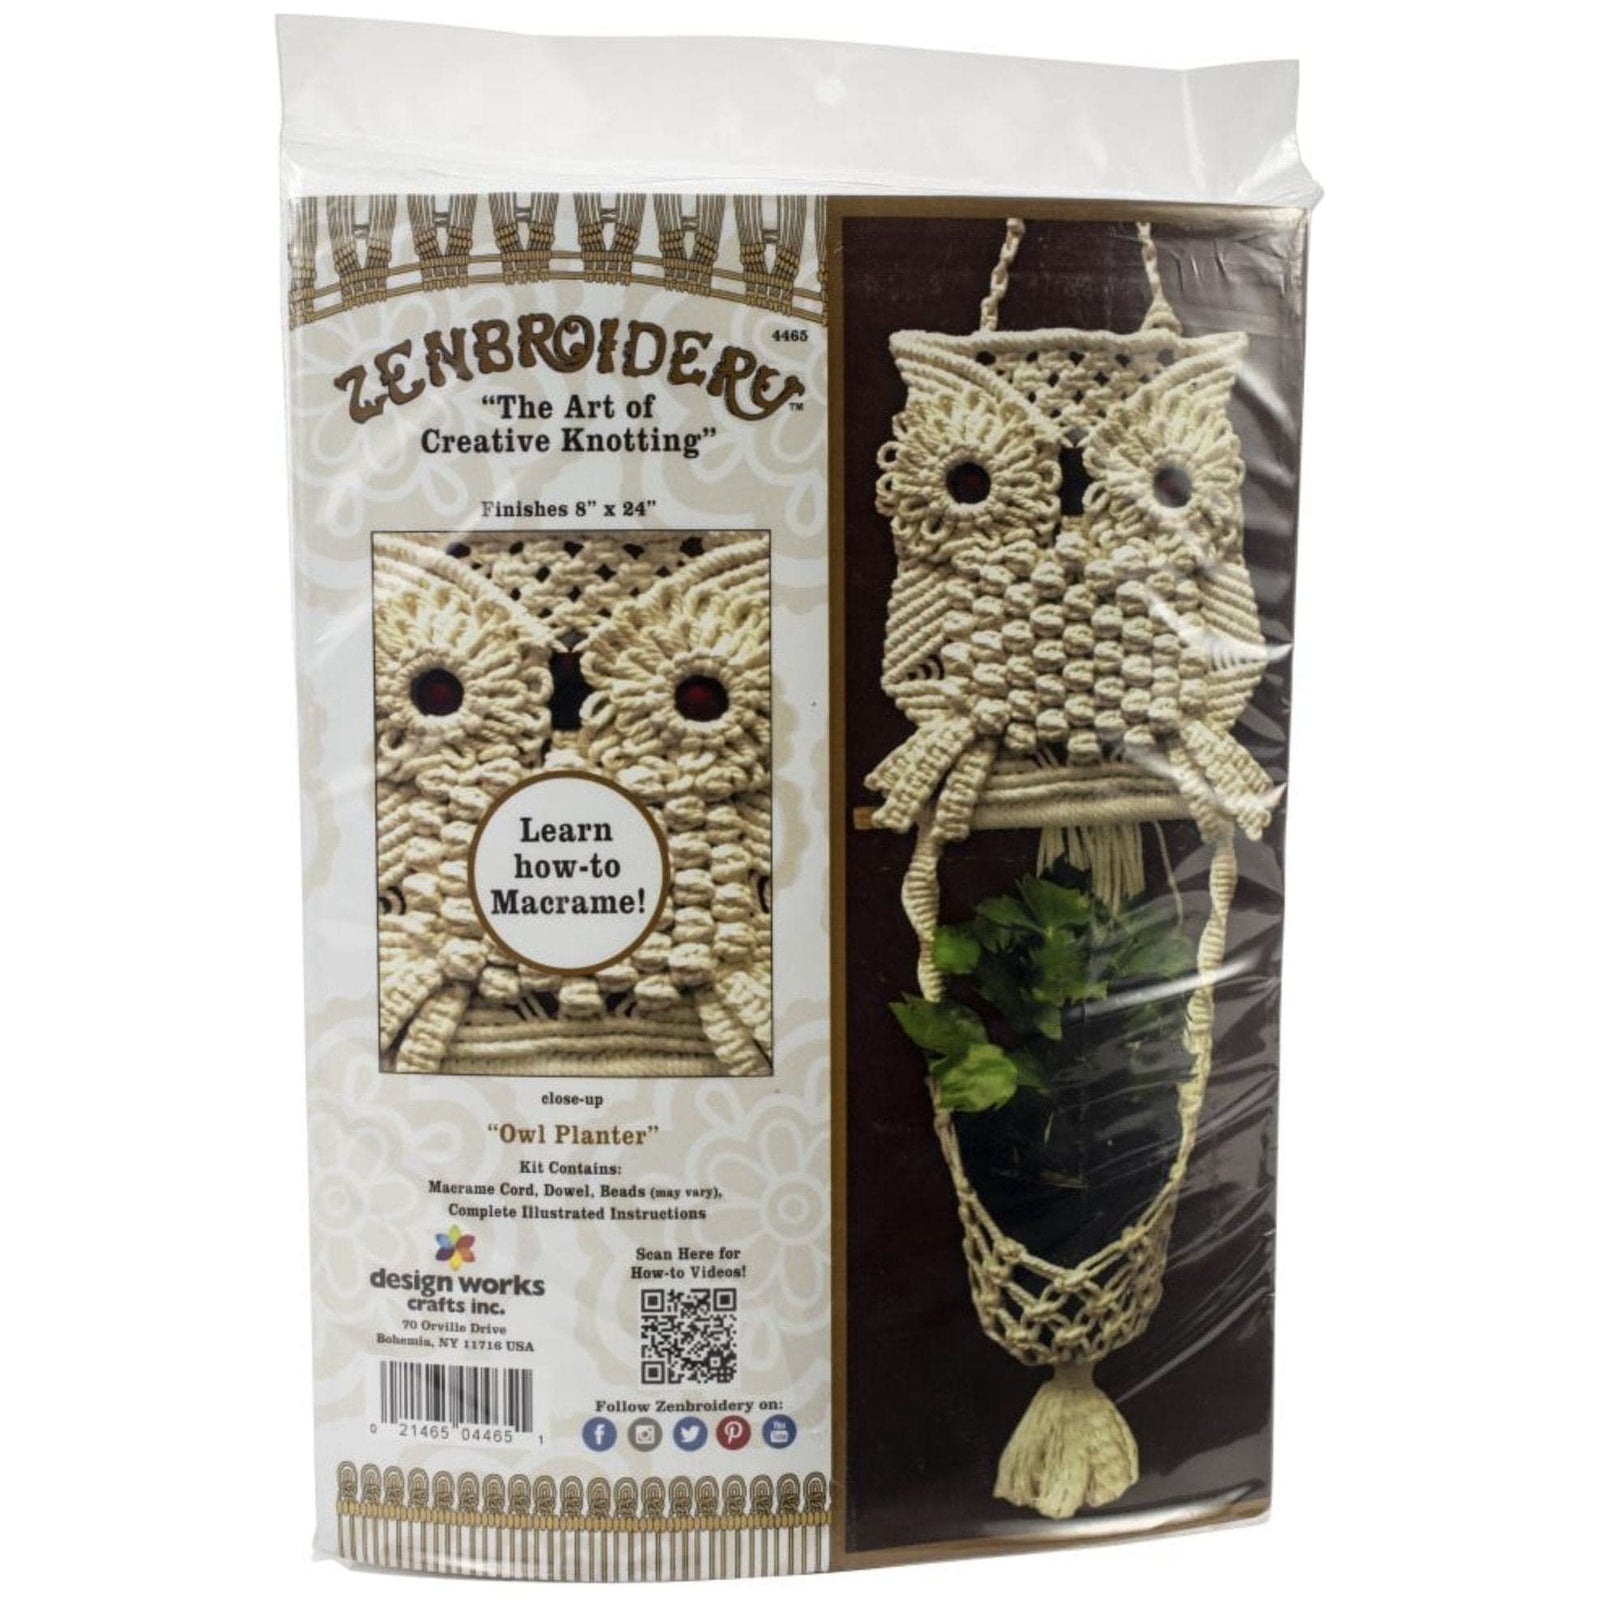 Solid Oak Lacy Squares Small Macrame Kit